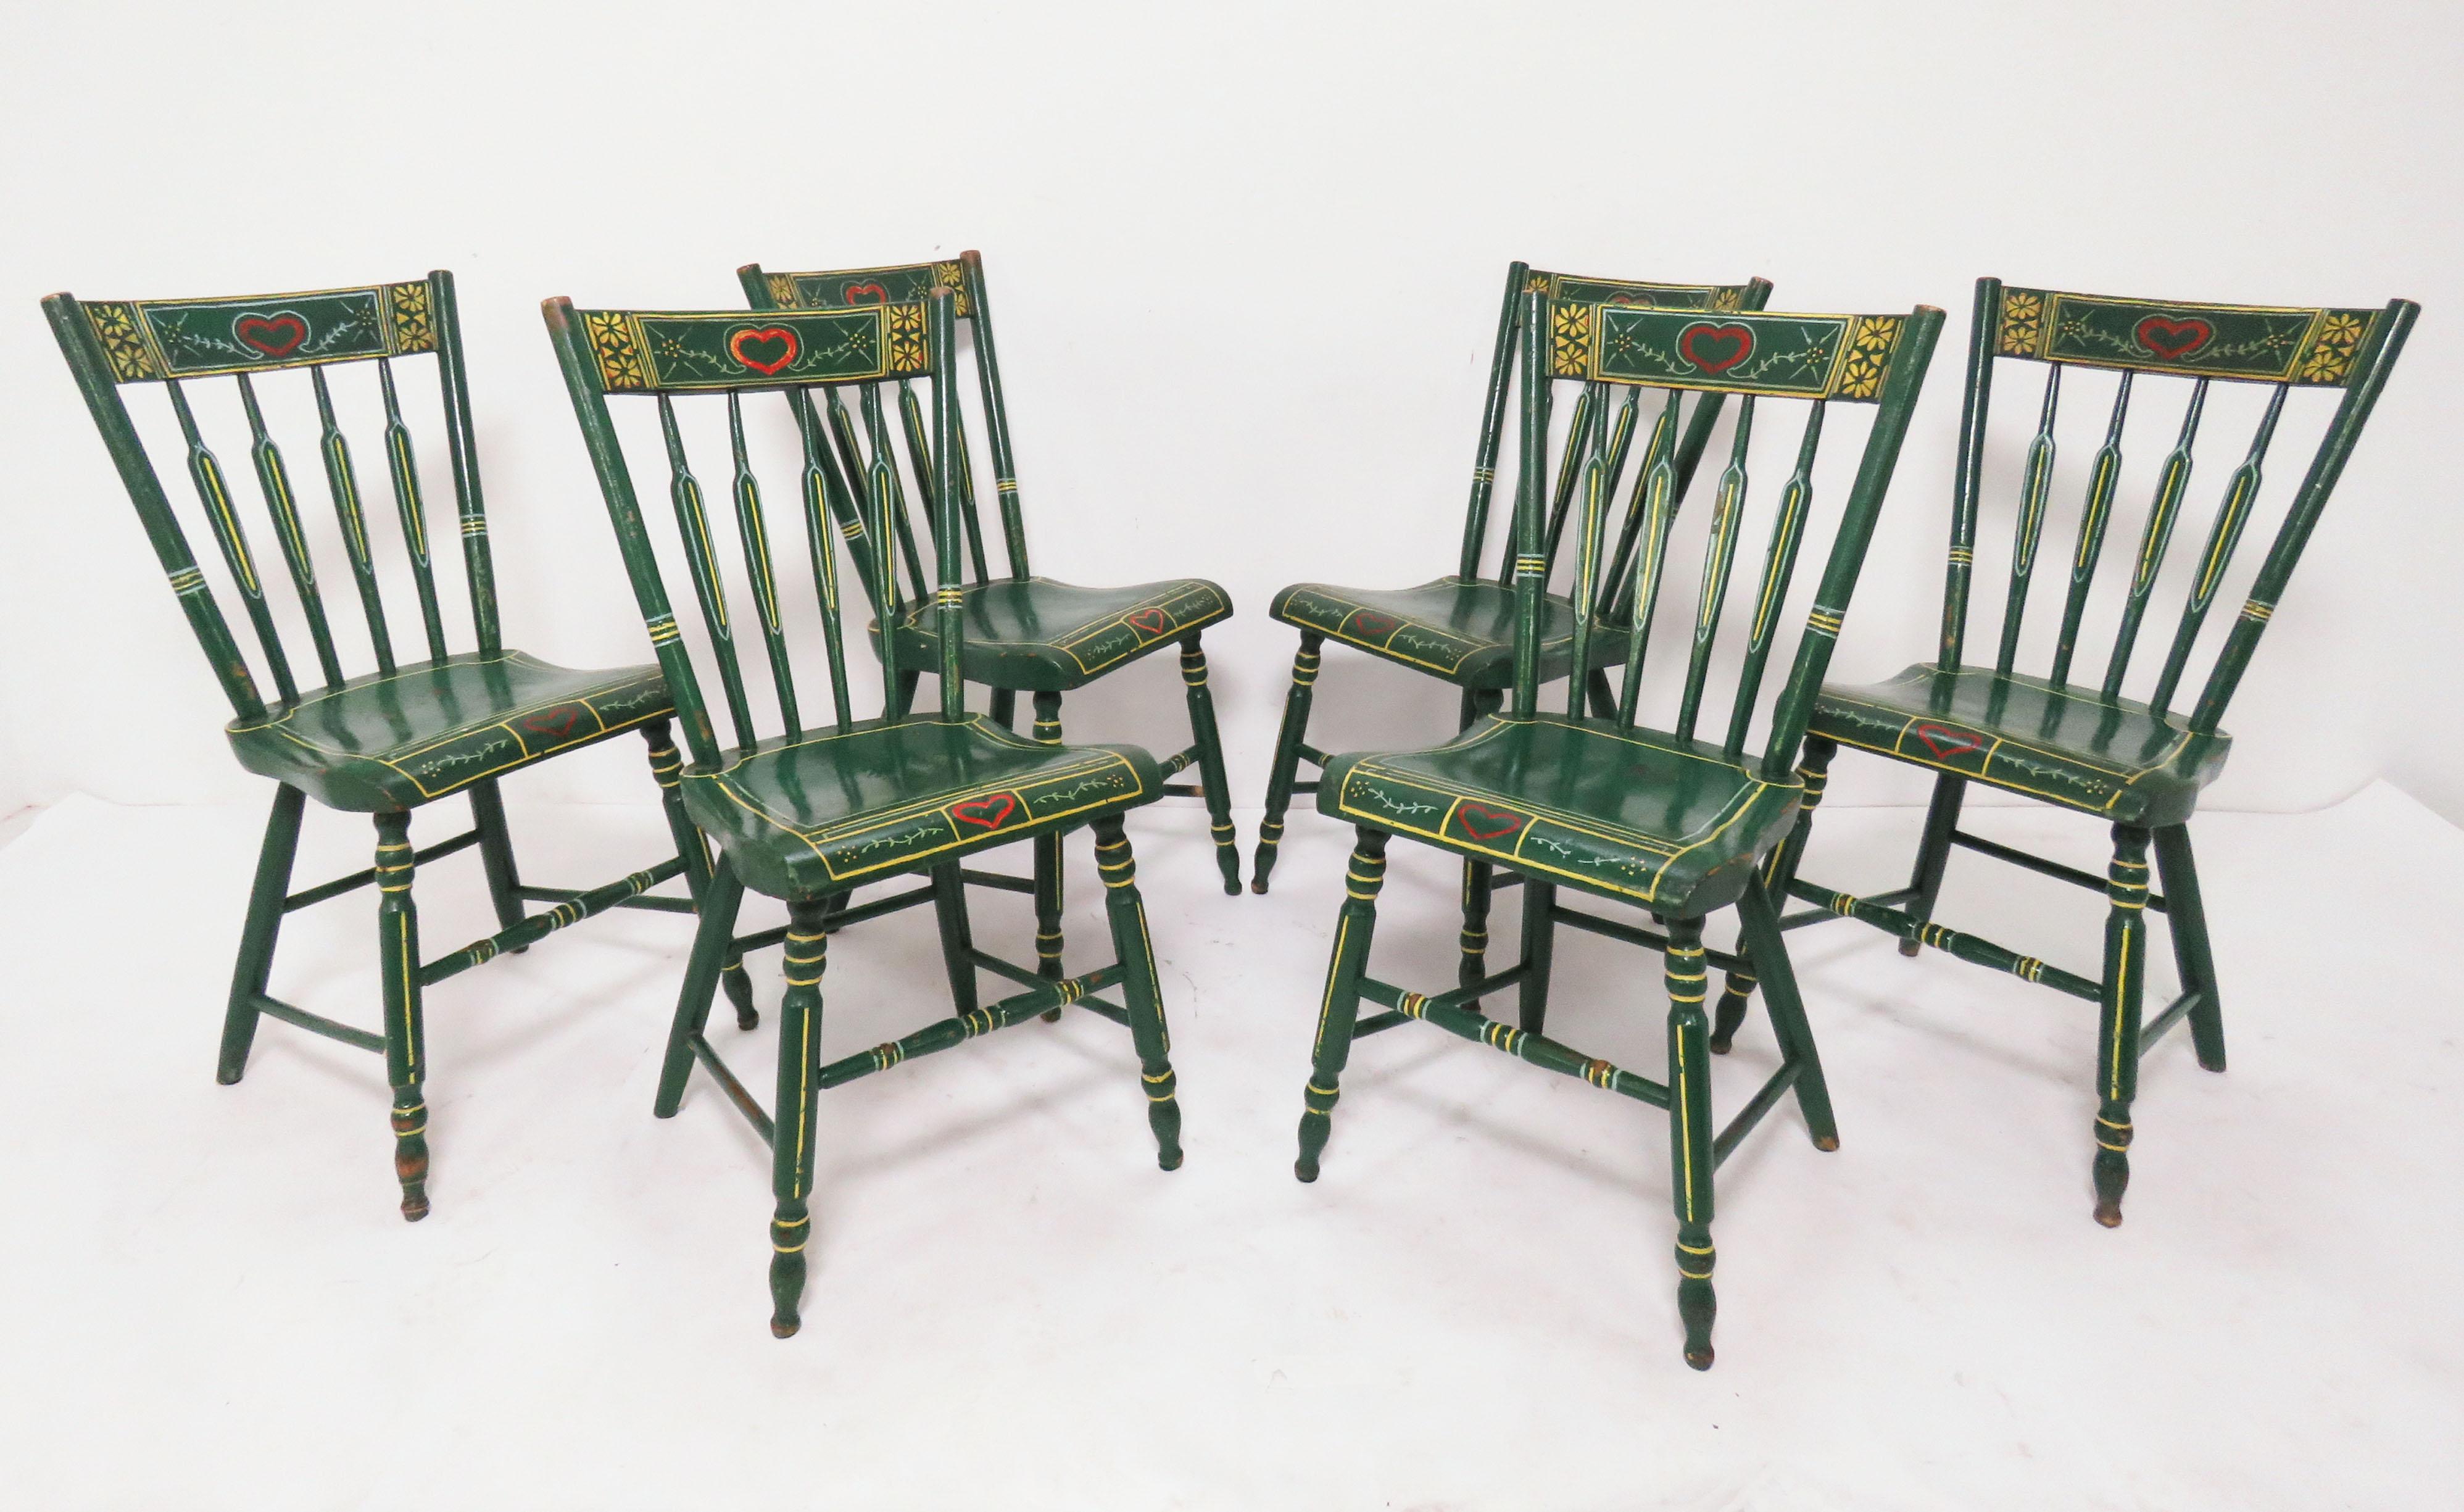 A set of six 19th century Pennsylvania Windsor chairs, embellished in the German Folk Art tradition of Lancaster County. A rare set found intact in their original Bauernmalerei (literally, farmer’s painting) decoration. Though the chairs themselves